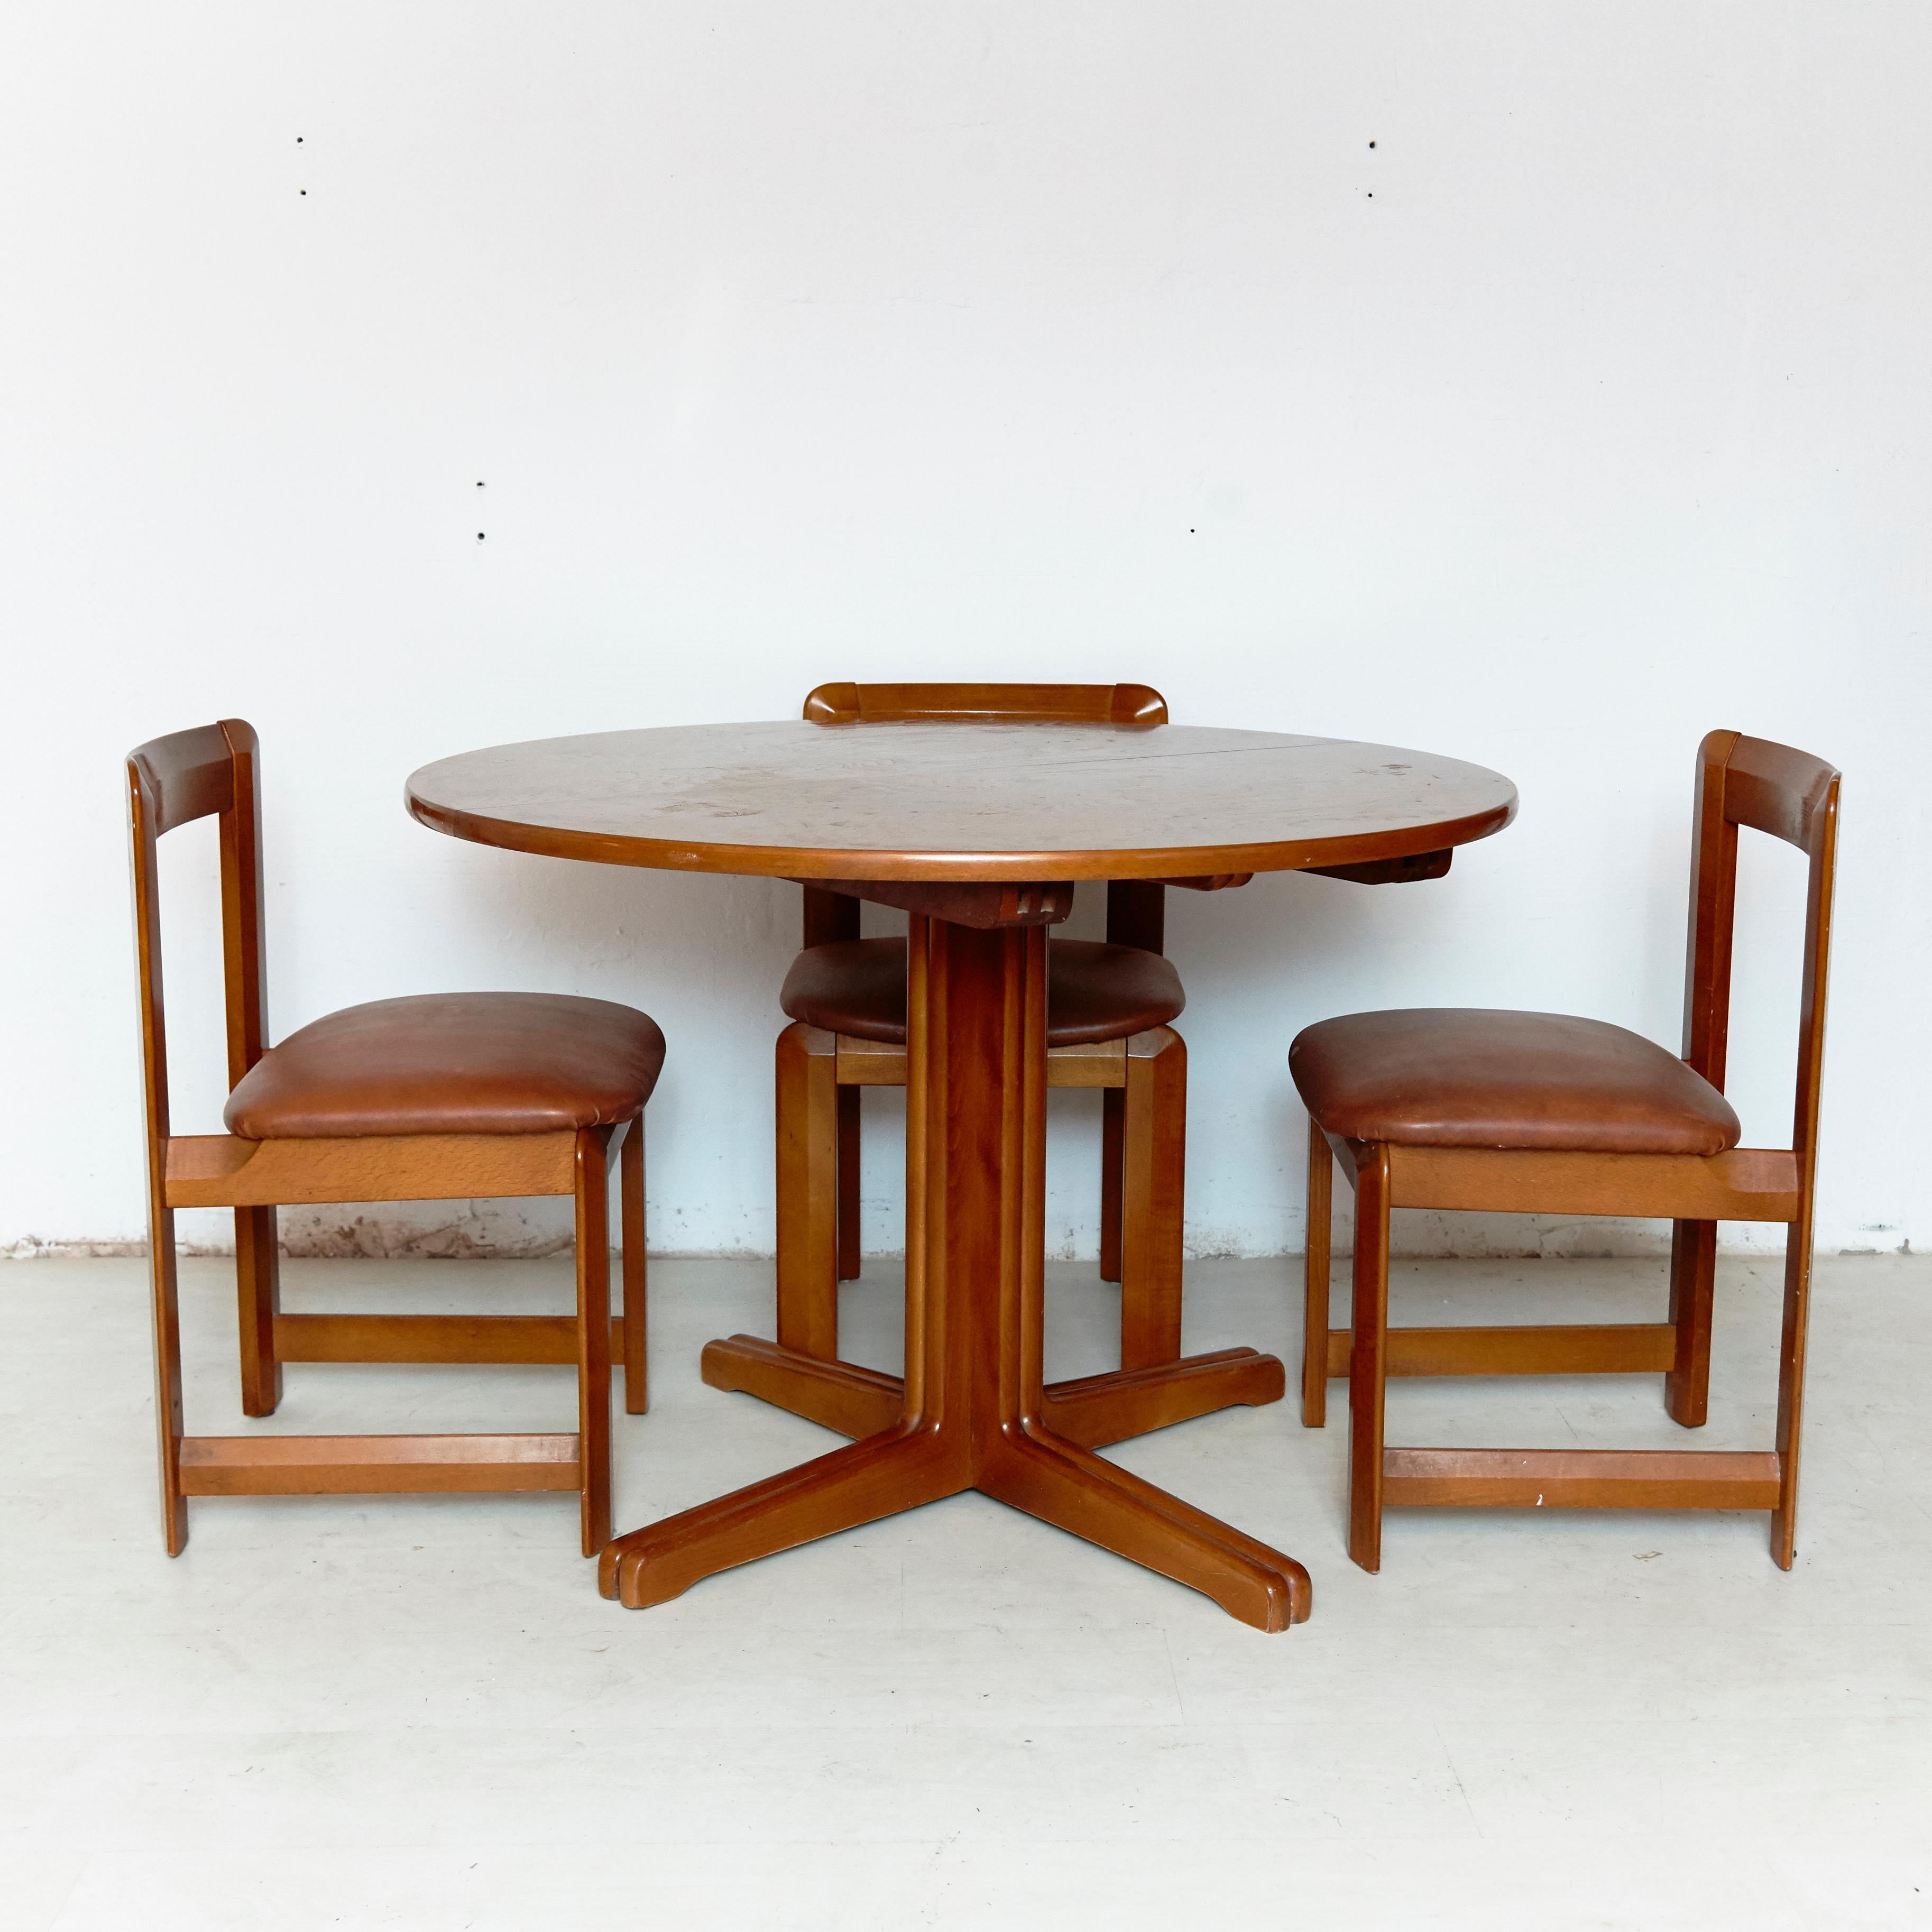 Set of three chairs and dining table.
Manufactured by Guillaumes (Spain), circa 1960.
Wood and skai.

In original condition with minor wear consistent of age and use, preserving a beautiful patina.

Table measurements:
H 75 cm x W 109 cm x D